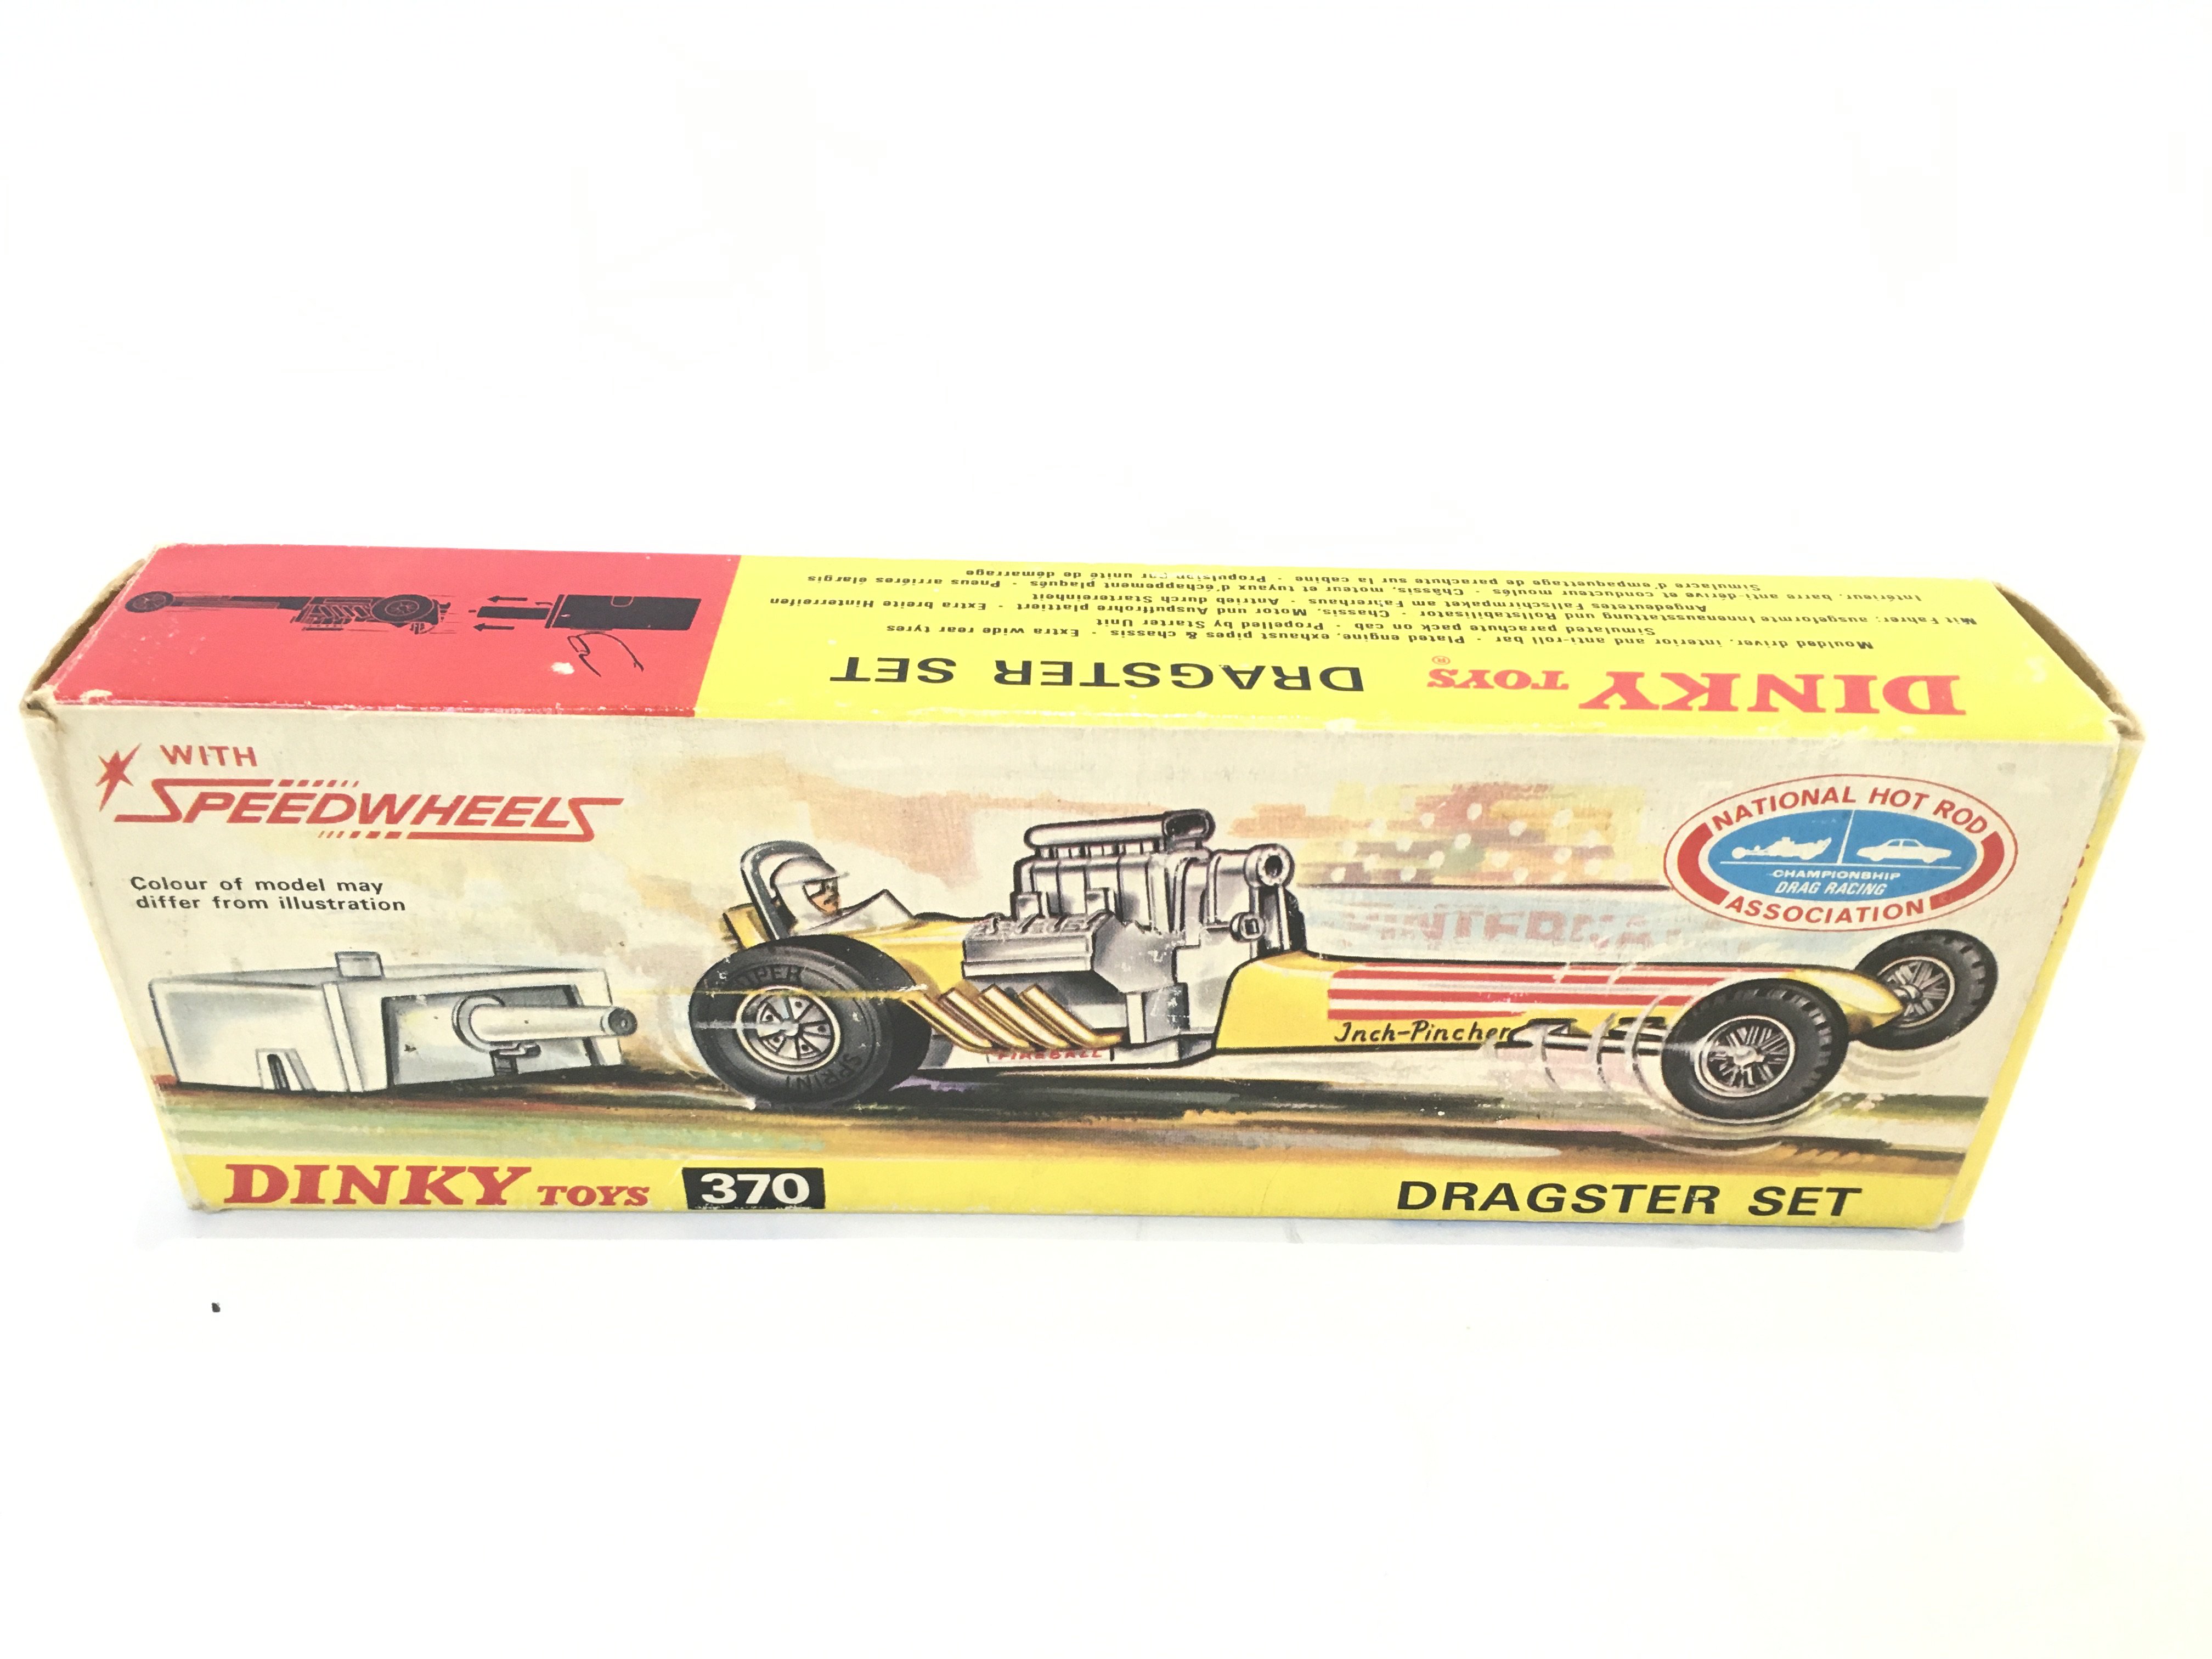 A Boxed Dinky Dragster Set #370 - Image 4 of 4